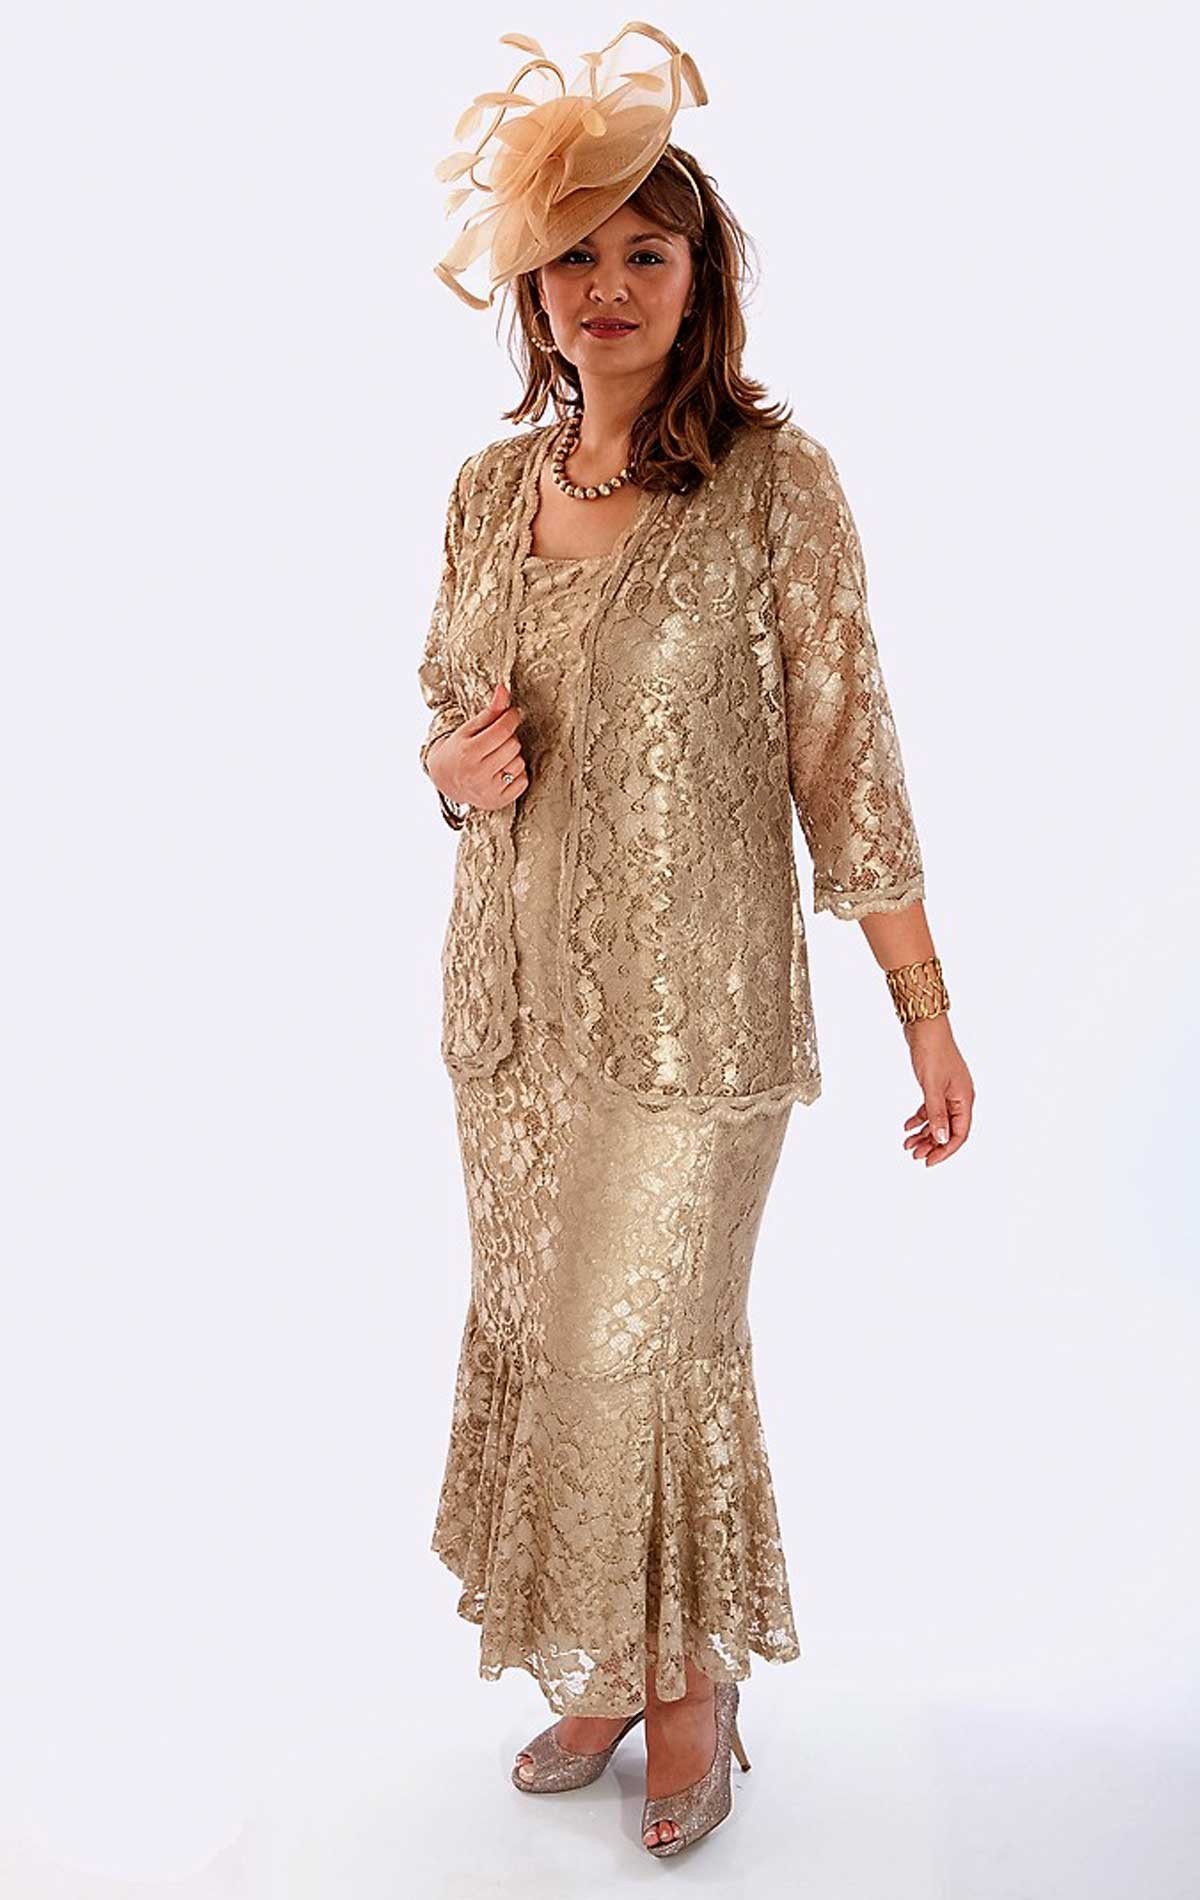 Rosa - Rosa -Plus Size Ladies Occasion Dress by Penguin Designs - Special Occasion Wear for Plus Size Mothers of the Bride & Mothers of the Groom at Blessings Occasions Shop, 1 Loyal Parade, Mill Rise, Westdene, Brighton. E. Sussex BN1 5GG Telephone: 01273 505766